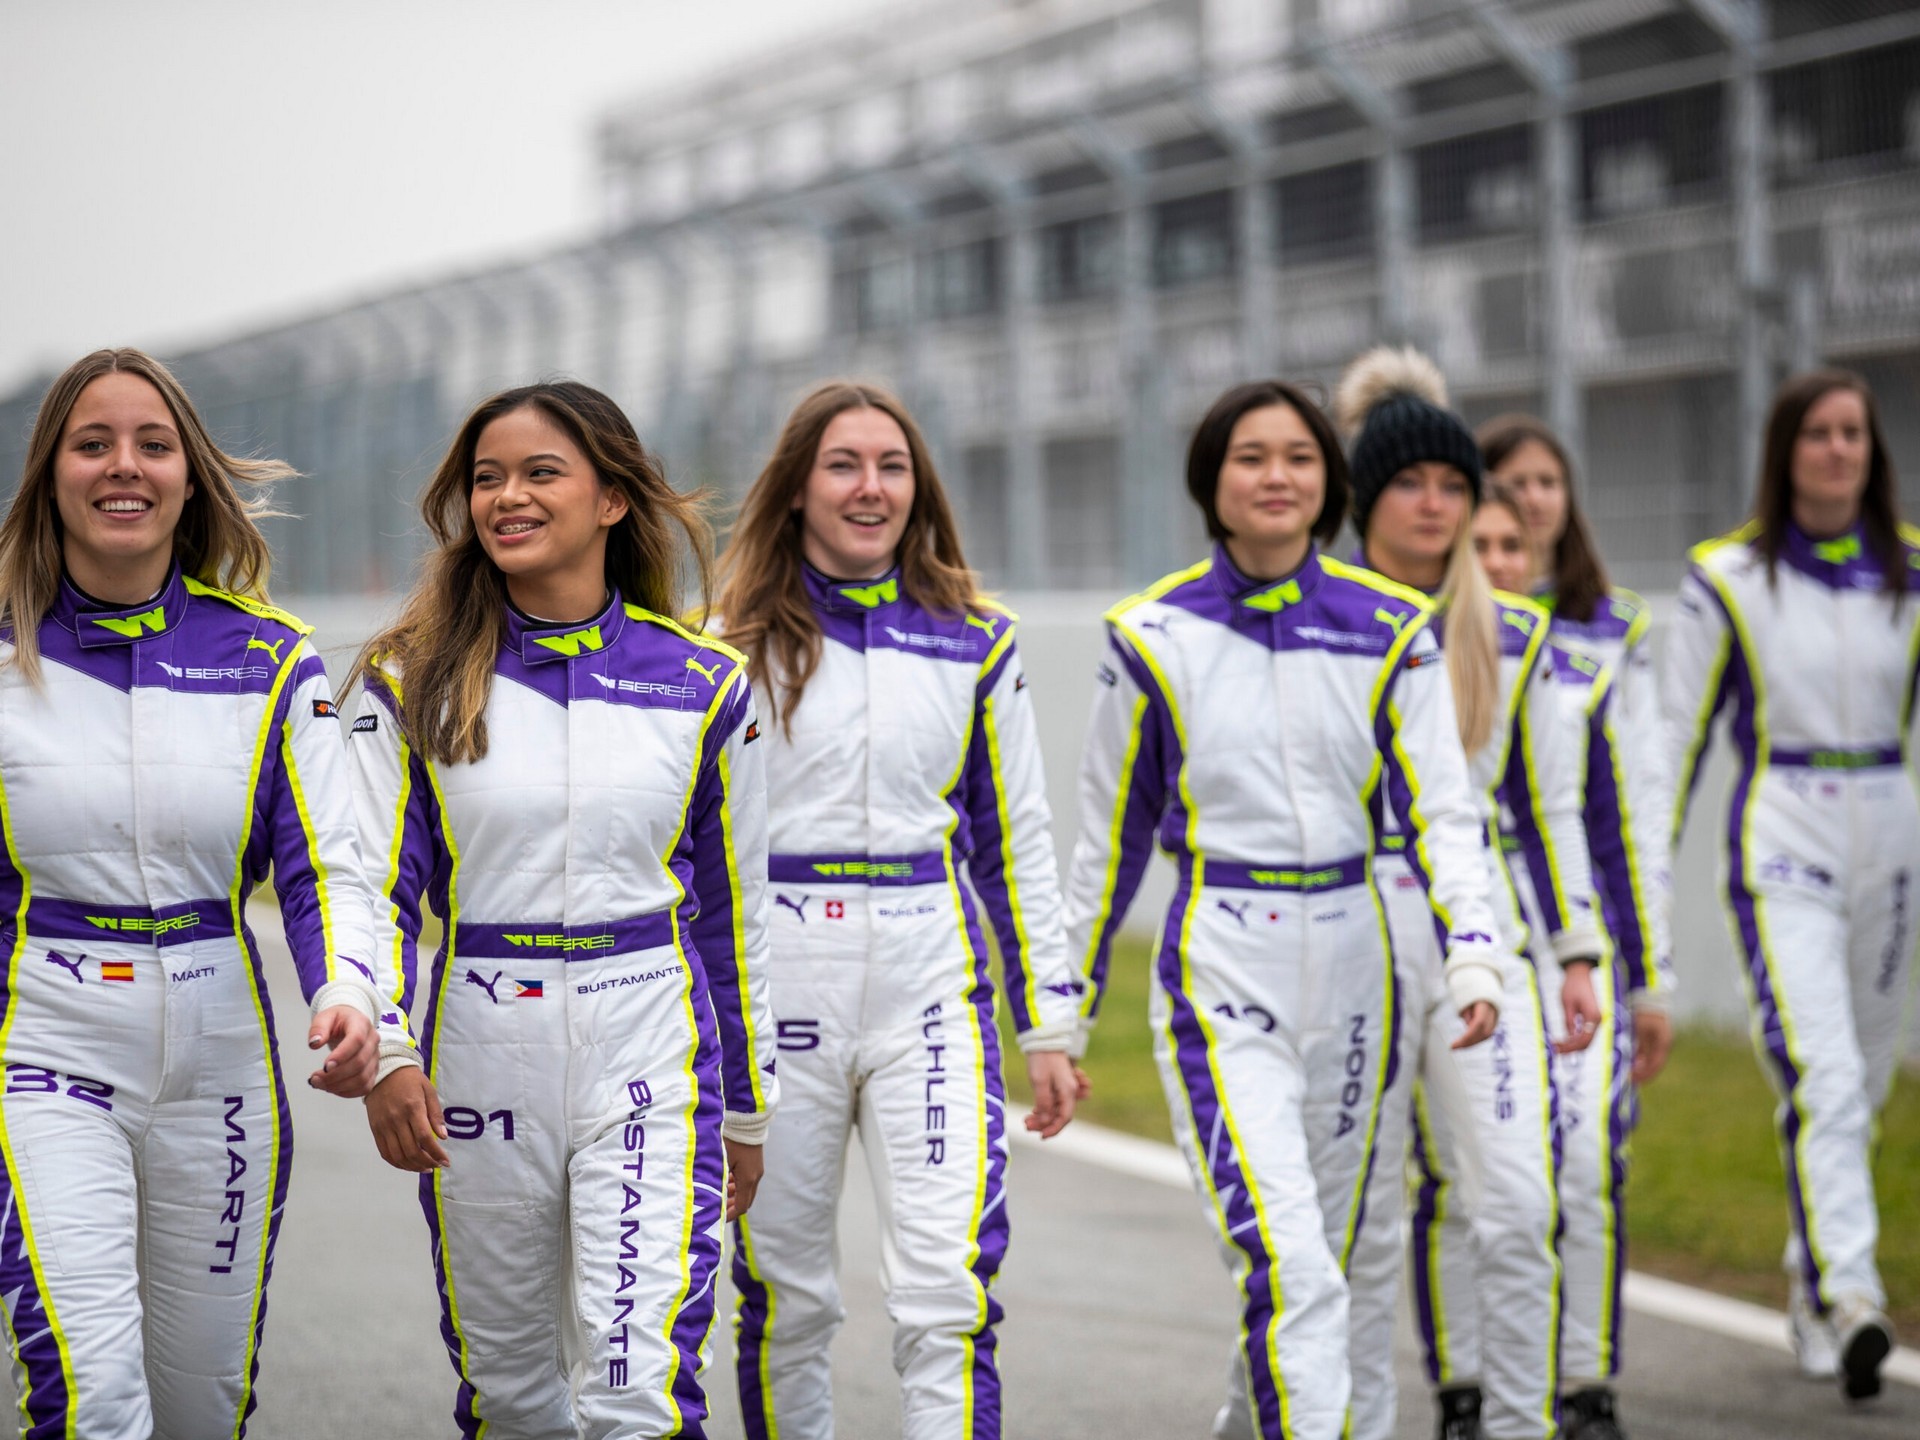 F1 Academy Debuts in 2023 as a Formula 1Endorsed WomenOnly